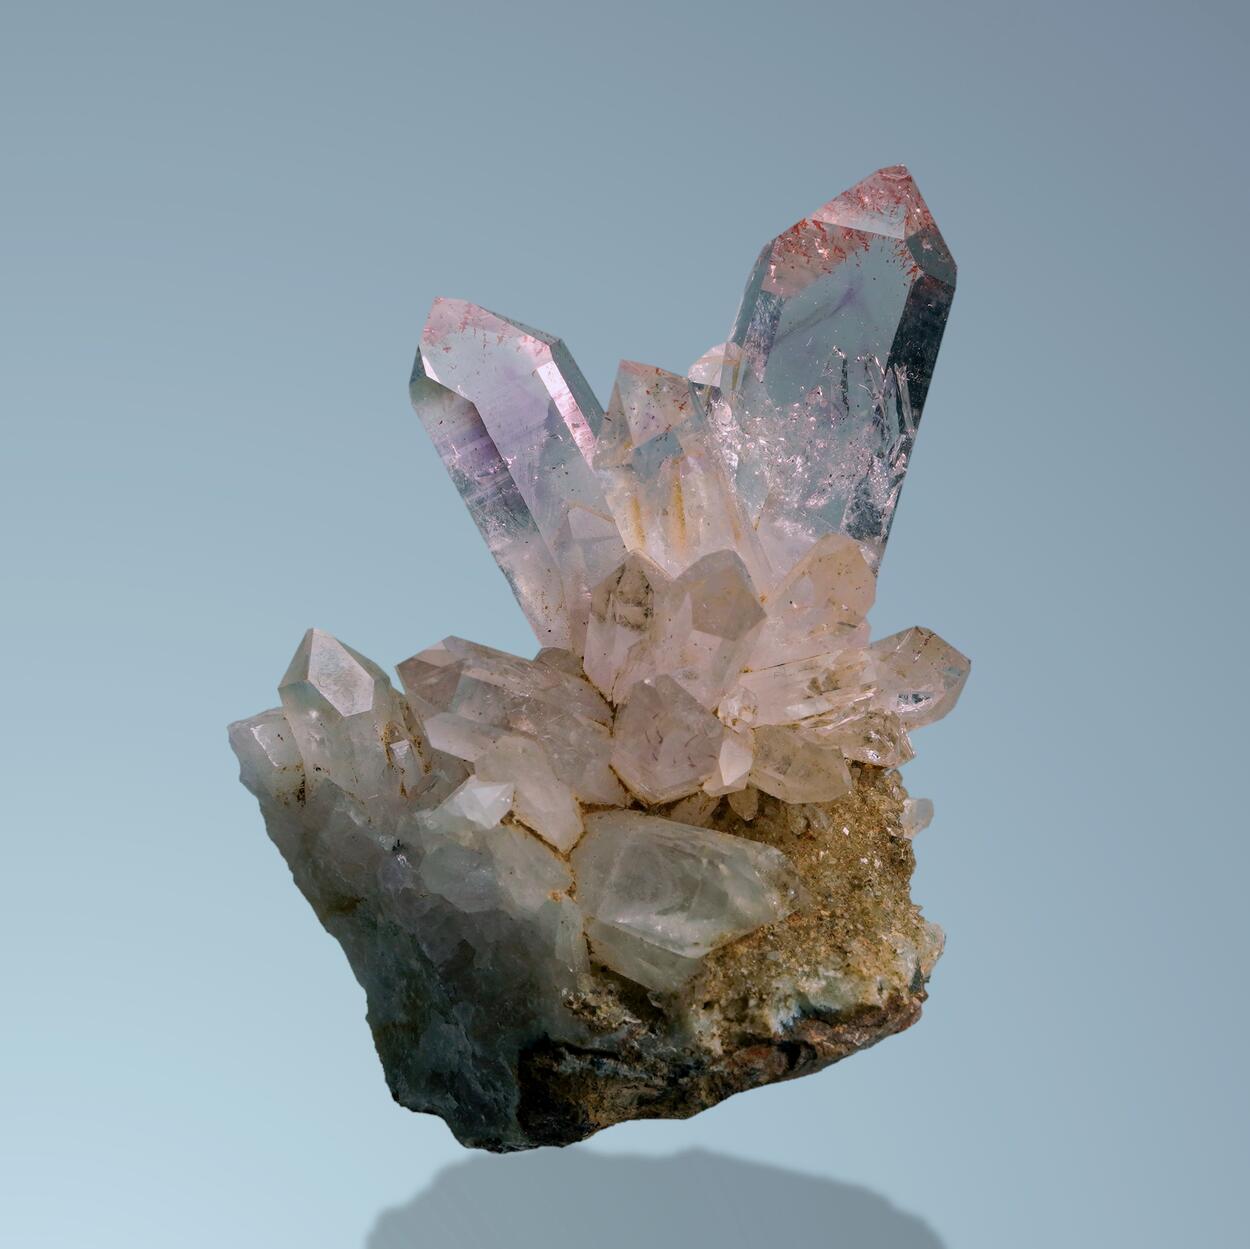 Amethyst With Lepidocrocite Inclusions